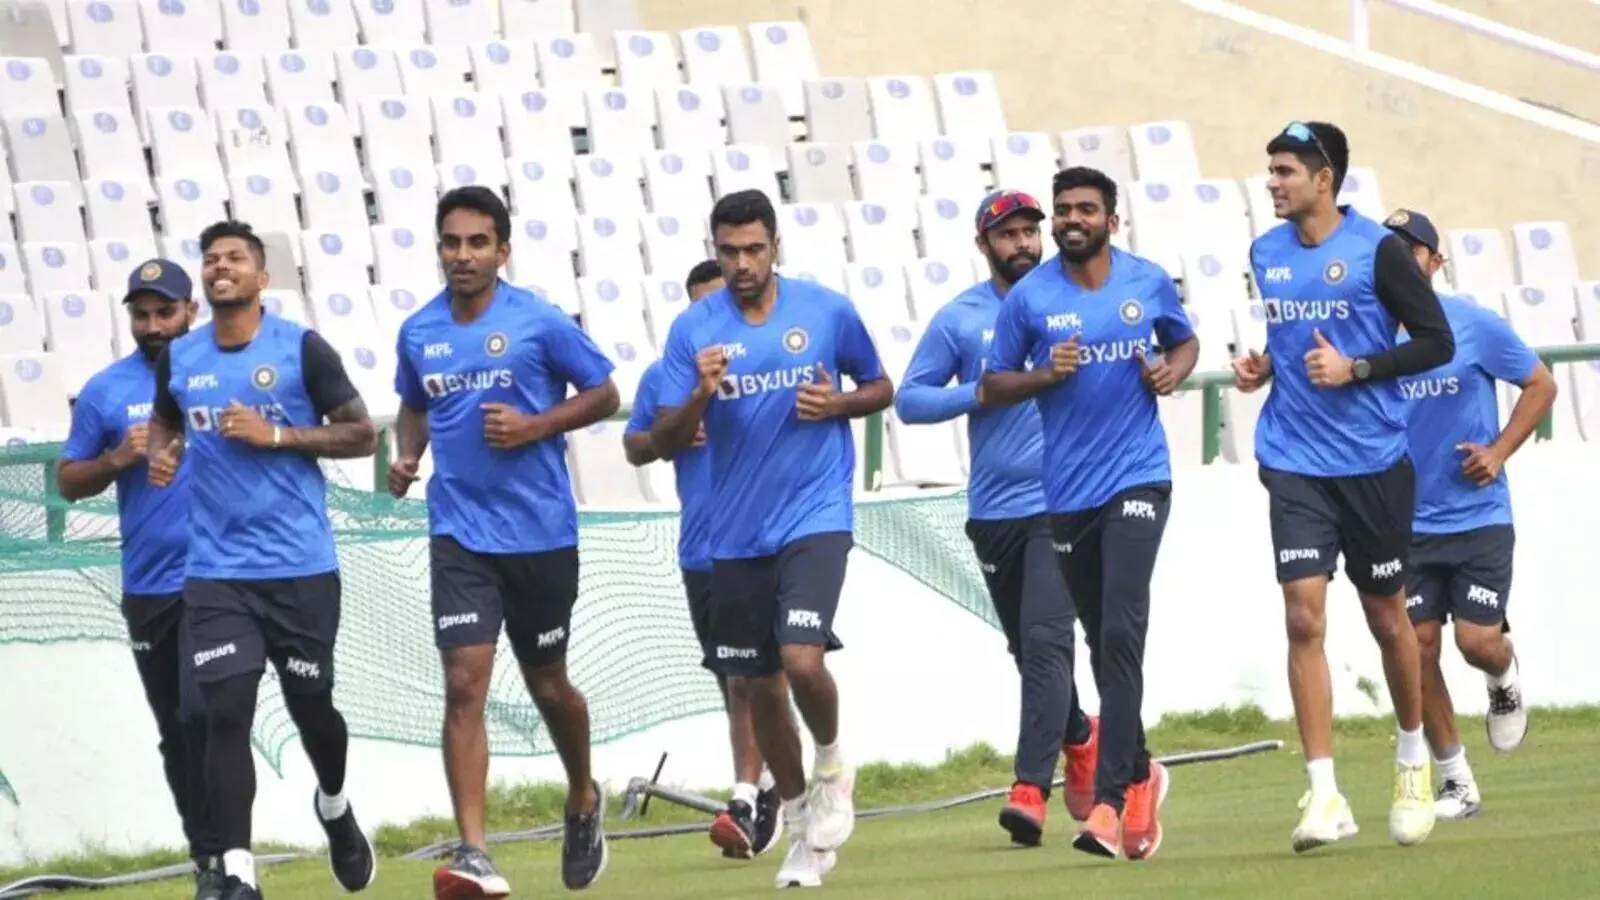 First Test match between India and Sri Lanka to begin in Mohali tomorrow